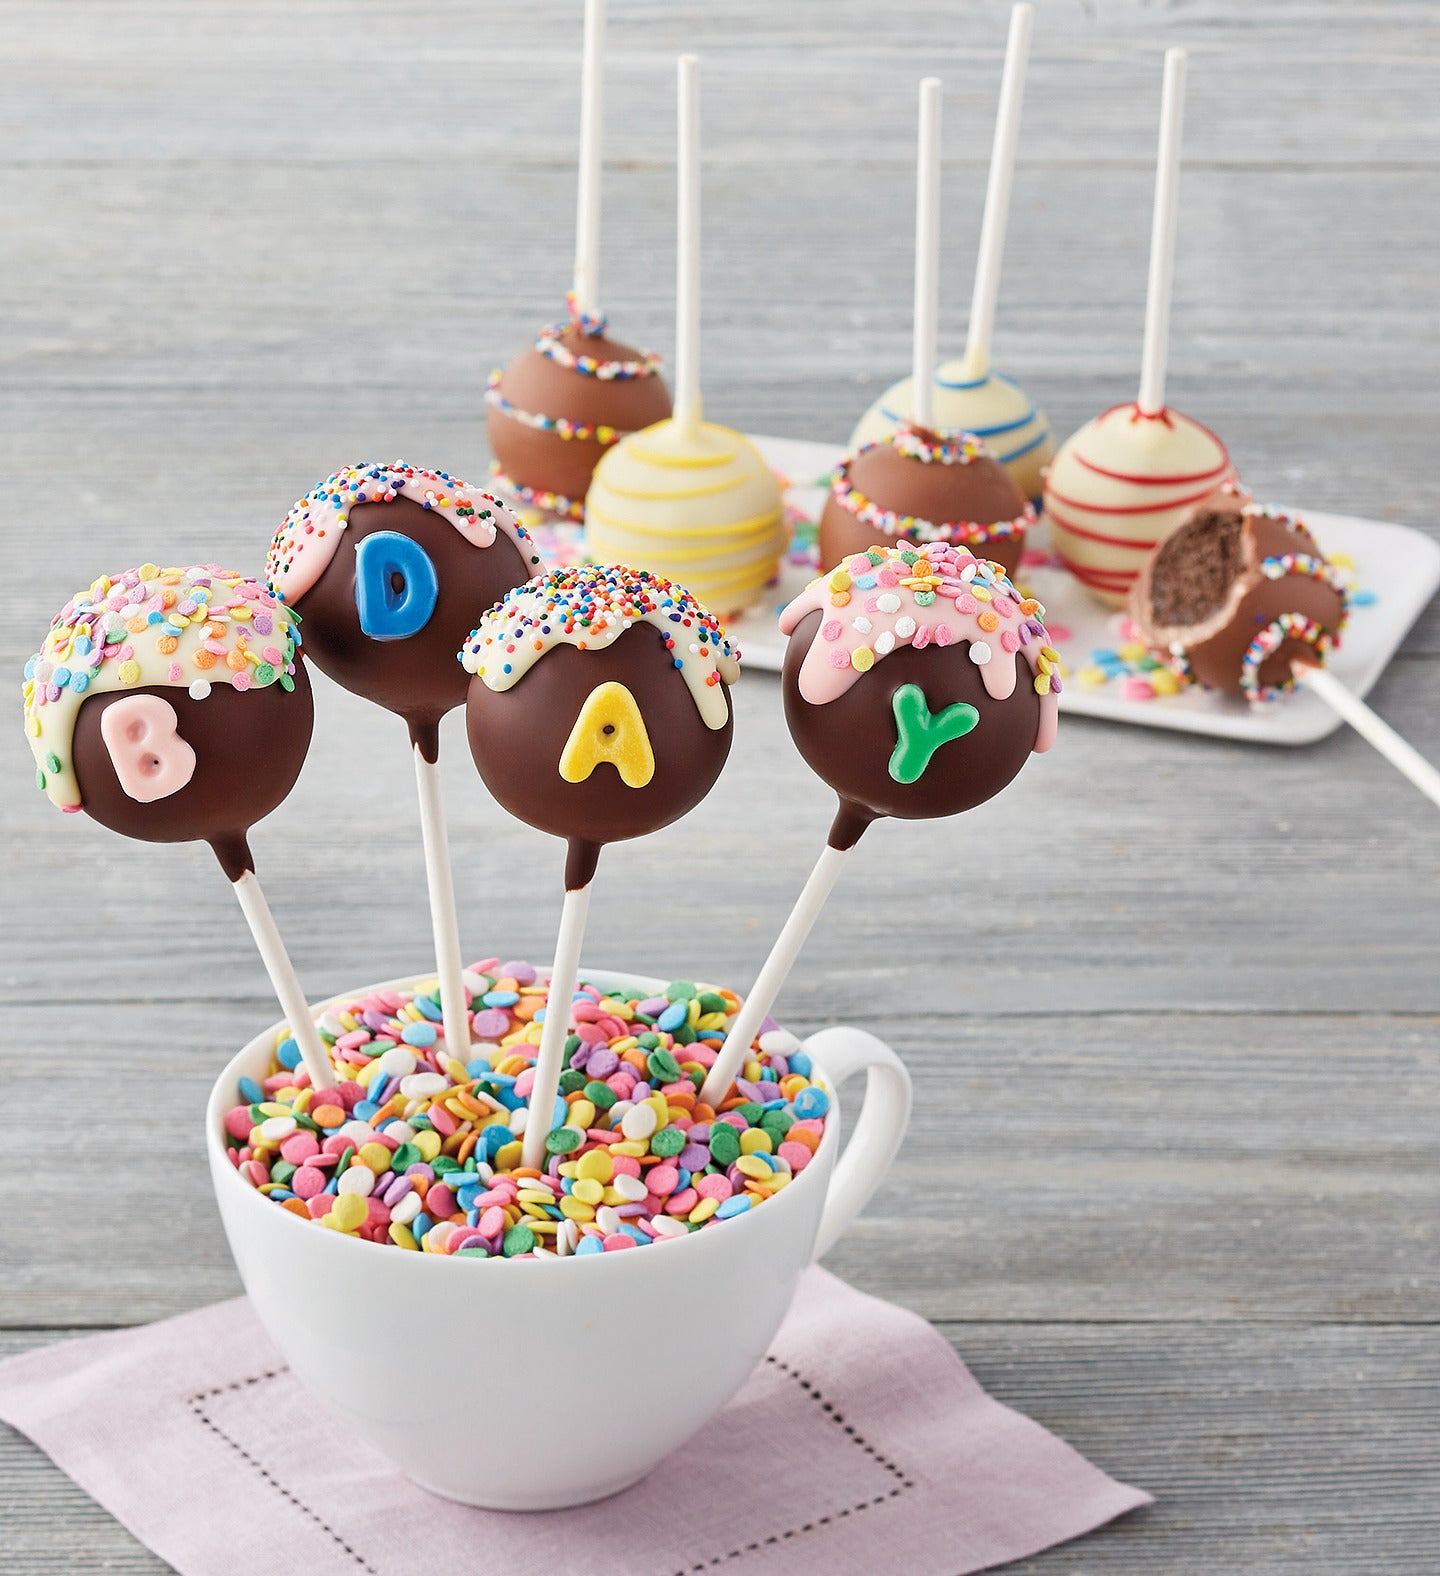 Details more than 139 cake pop gifts super hot